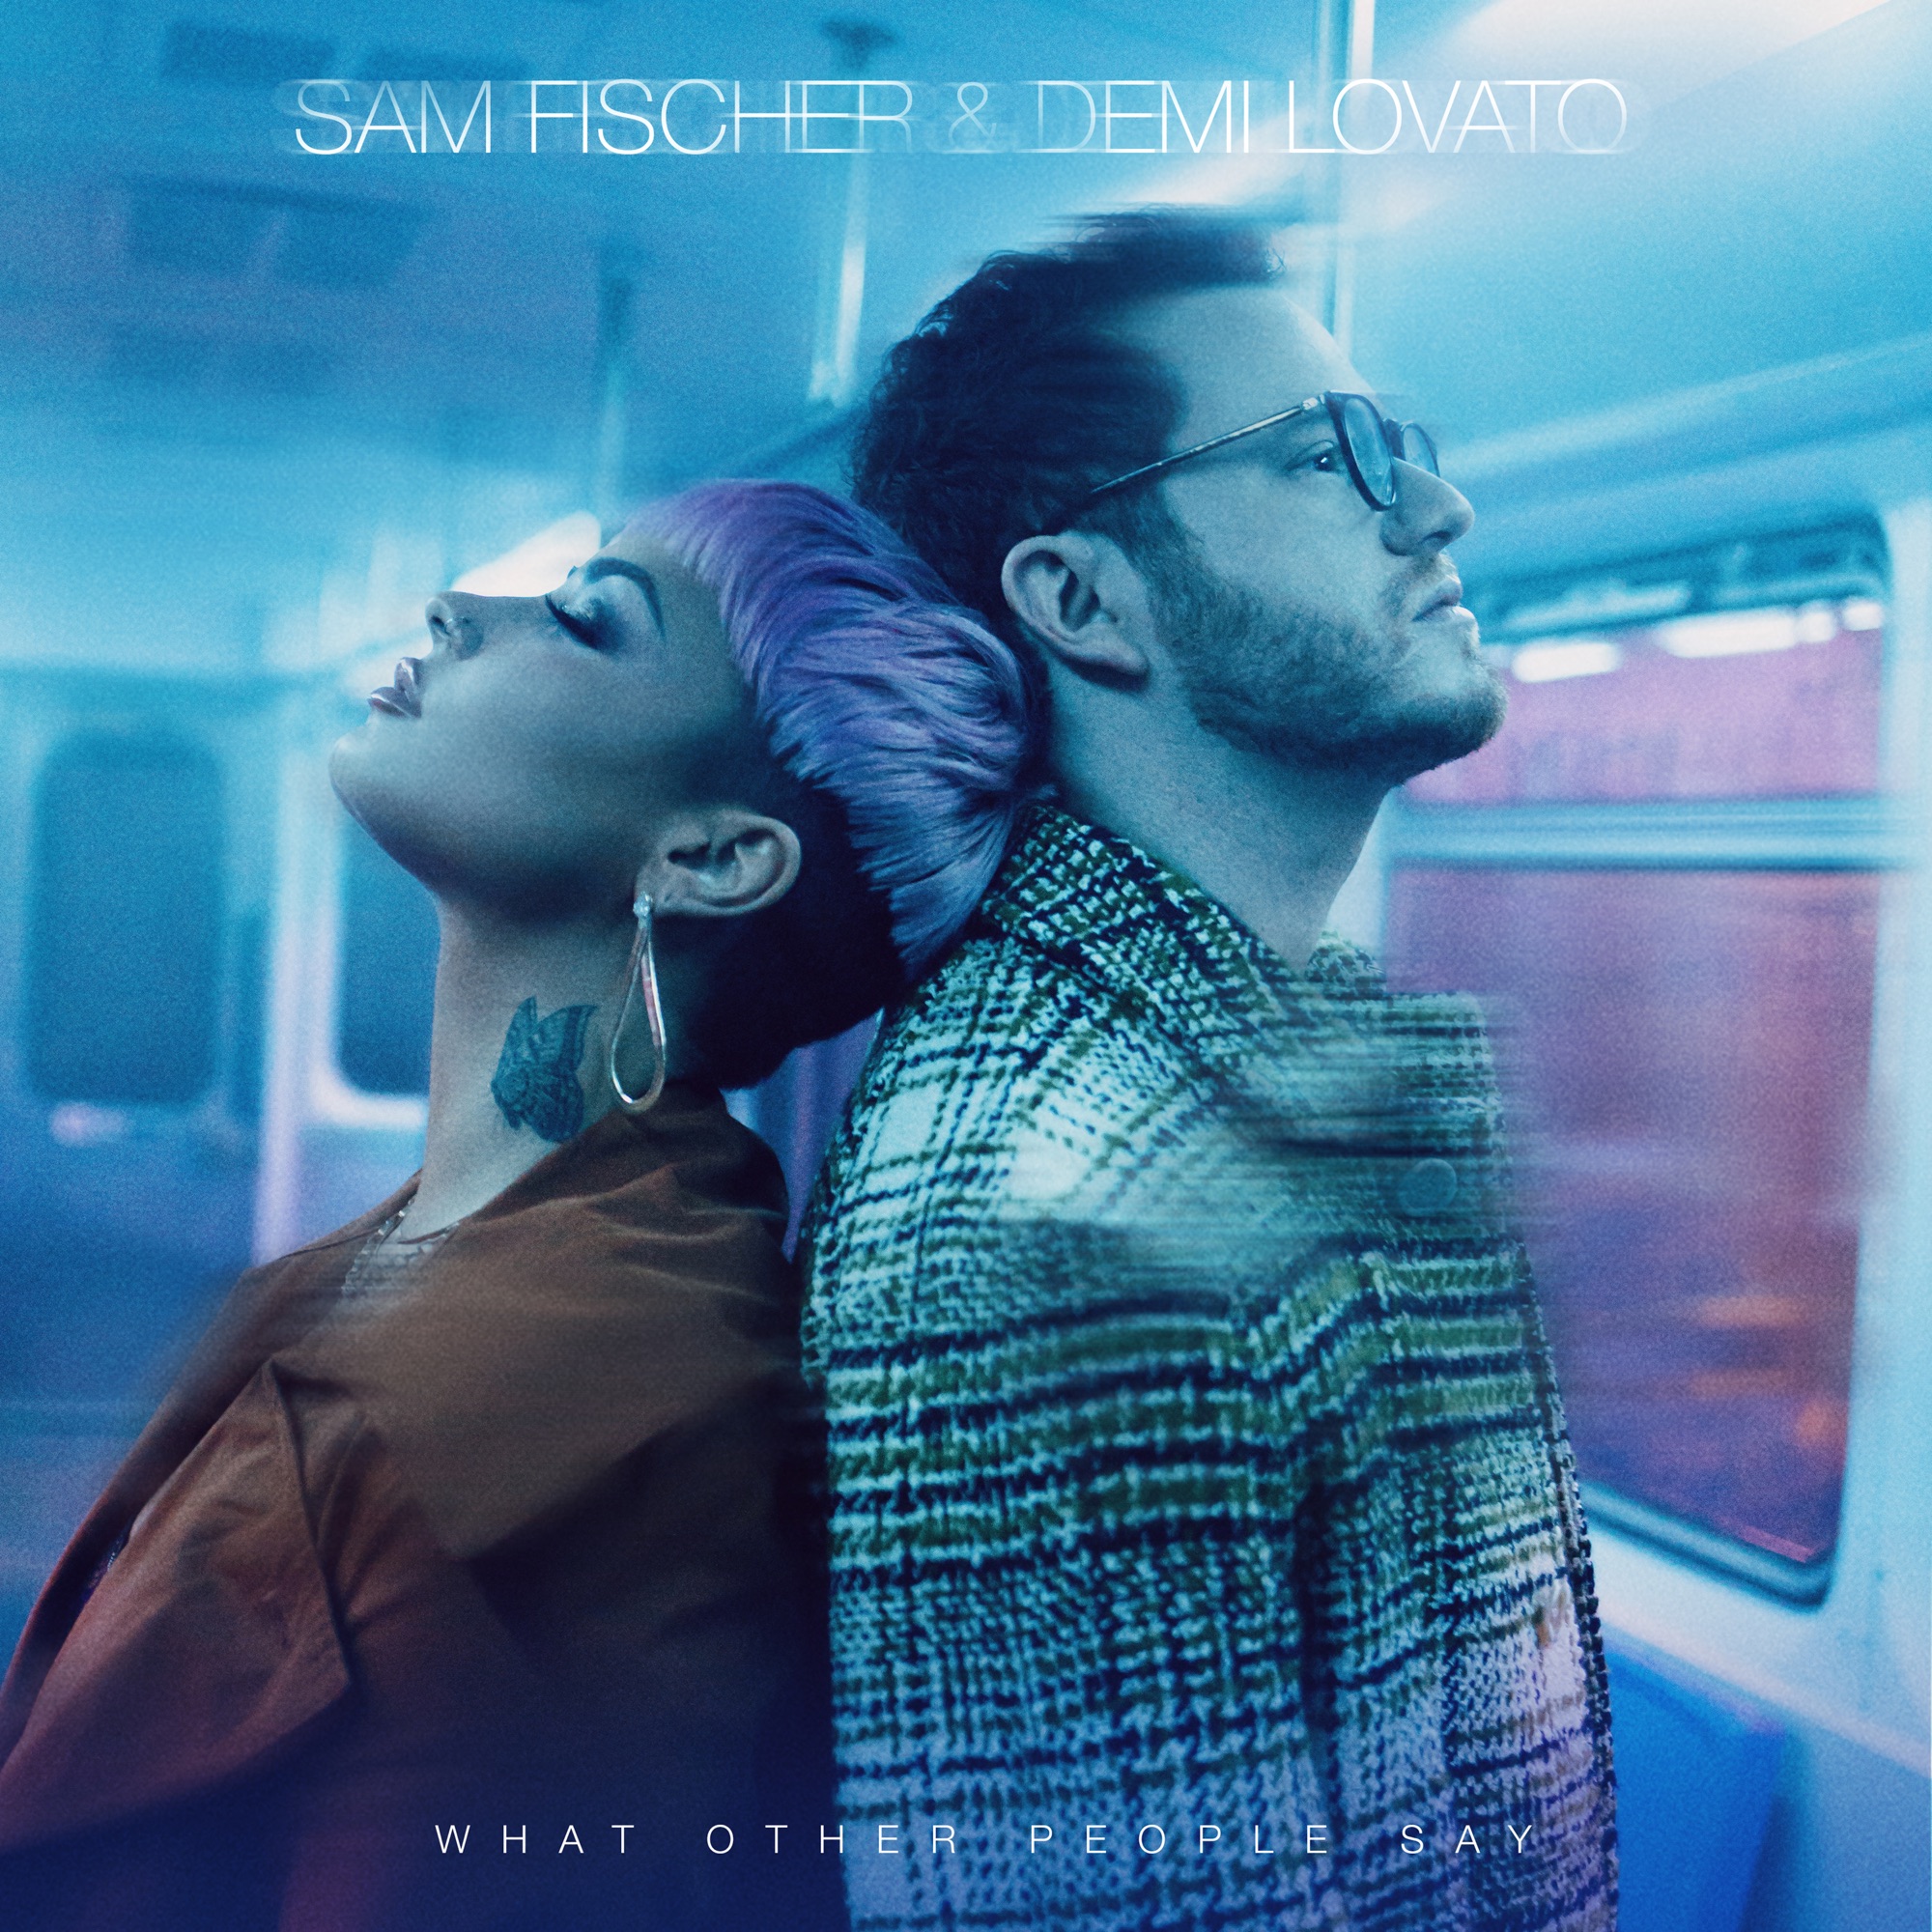 Sam Fischer & Demi Lovato - What Other People Say - Single